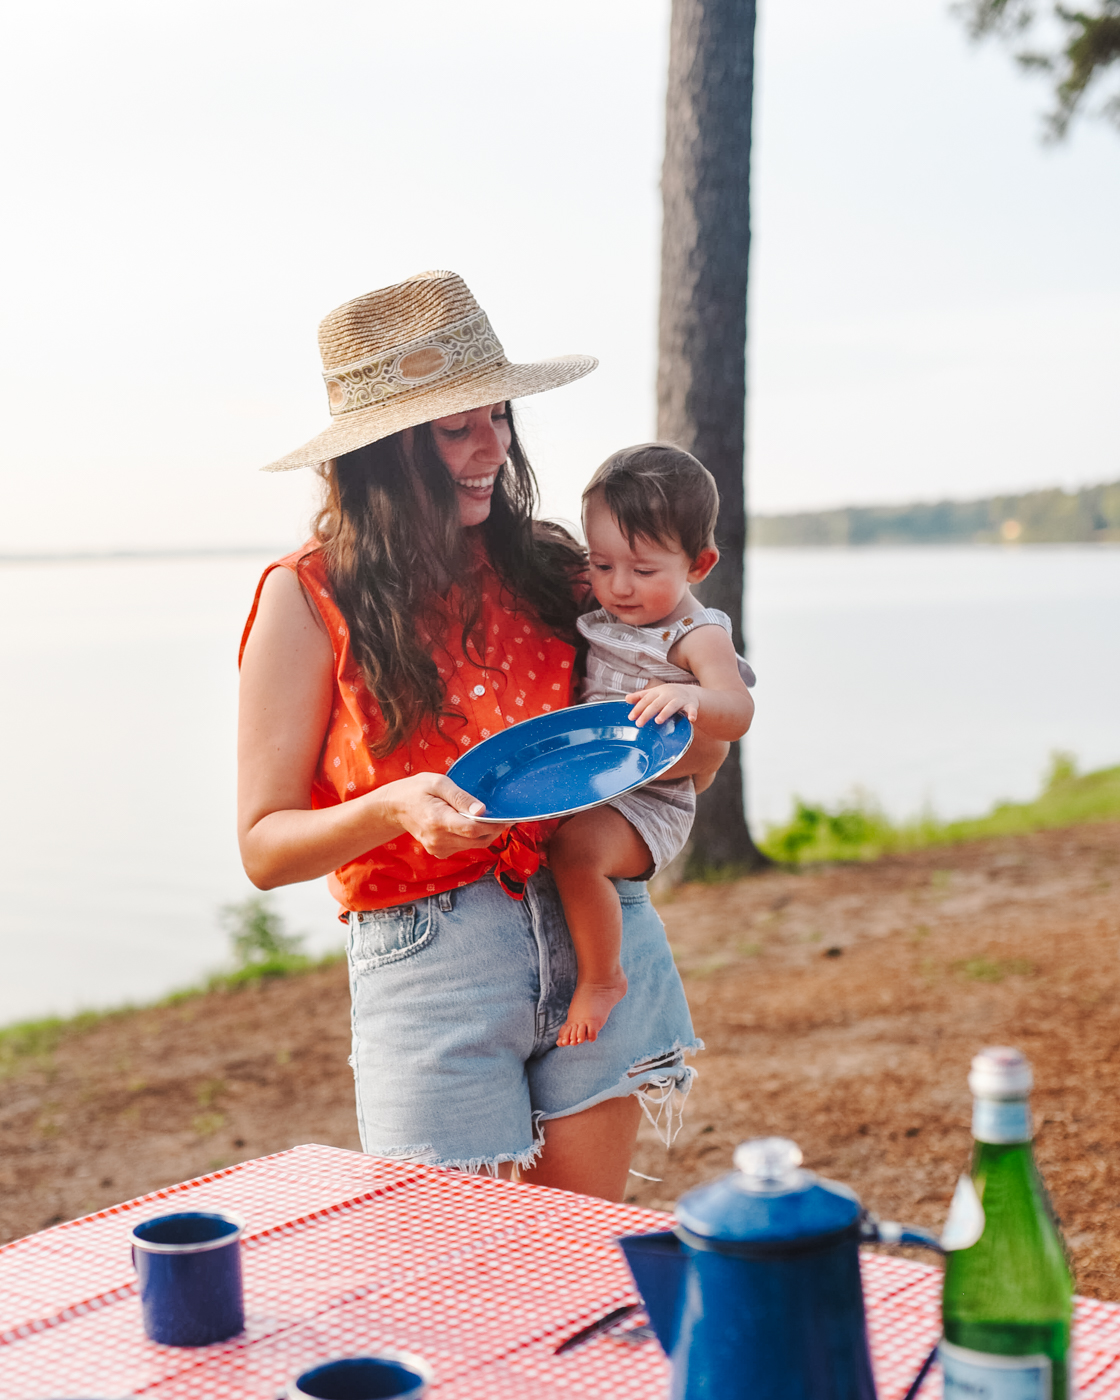 Camping With Kids by popular Memphis lifestyle blog, Lone Star Looking Glass: image of a mom holding her young son and a blue metal plate. 